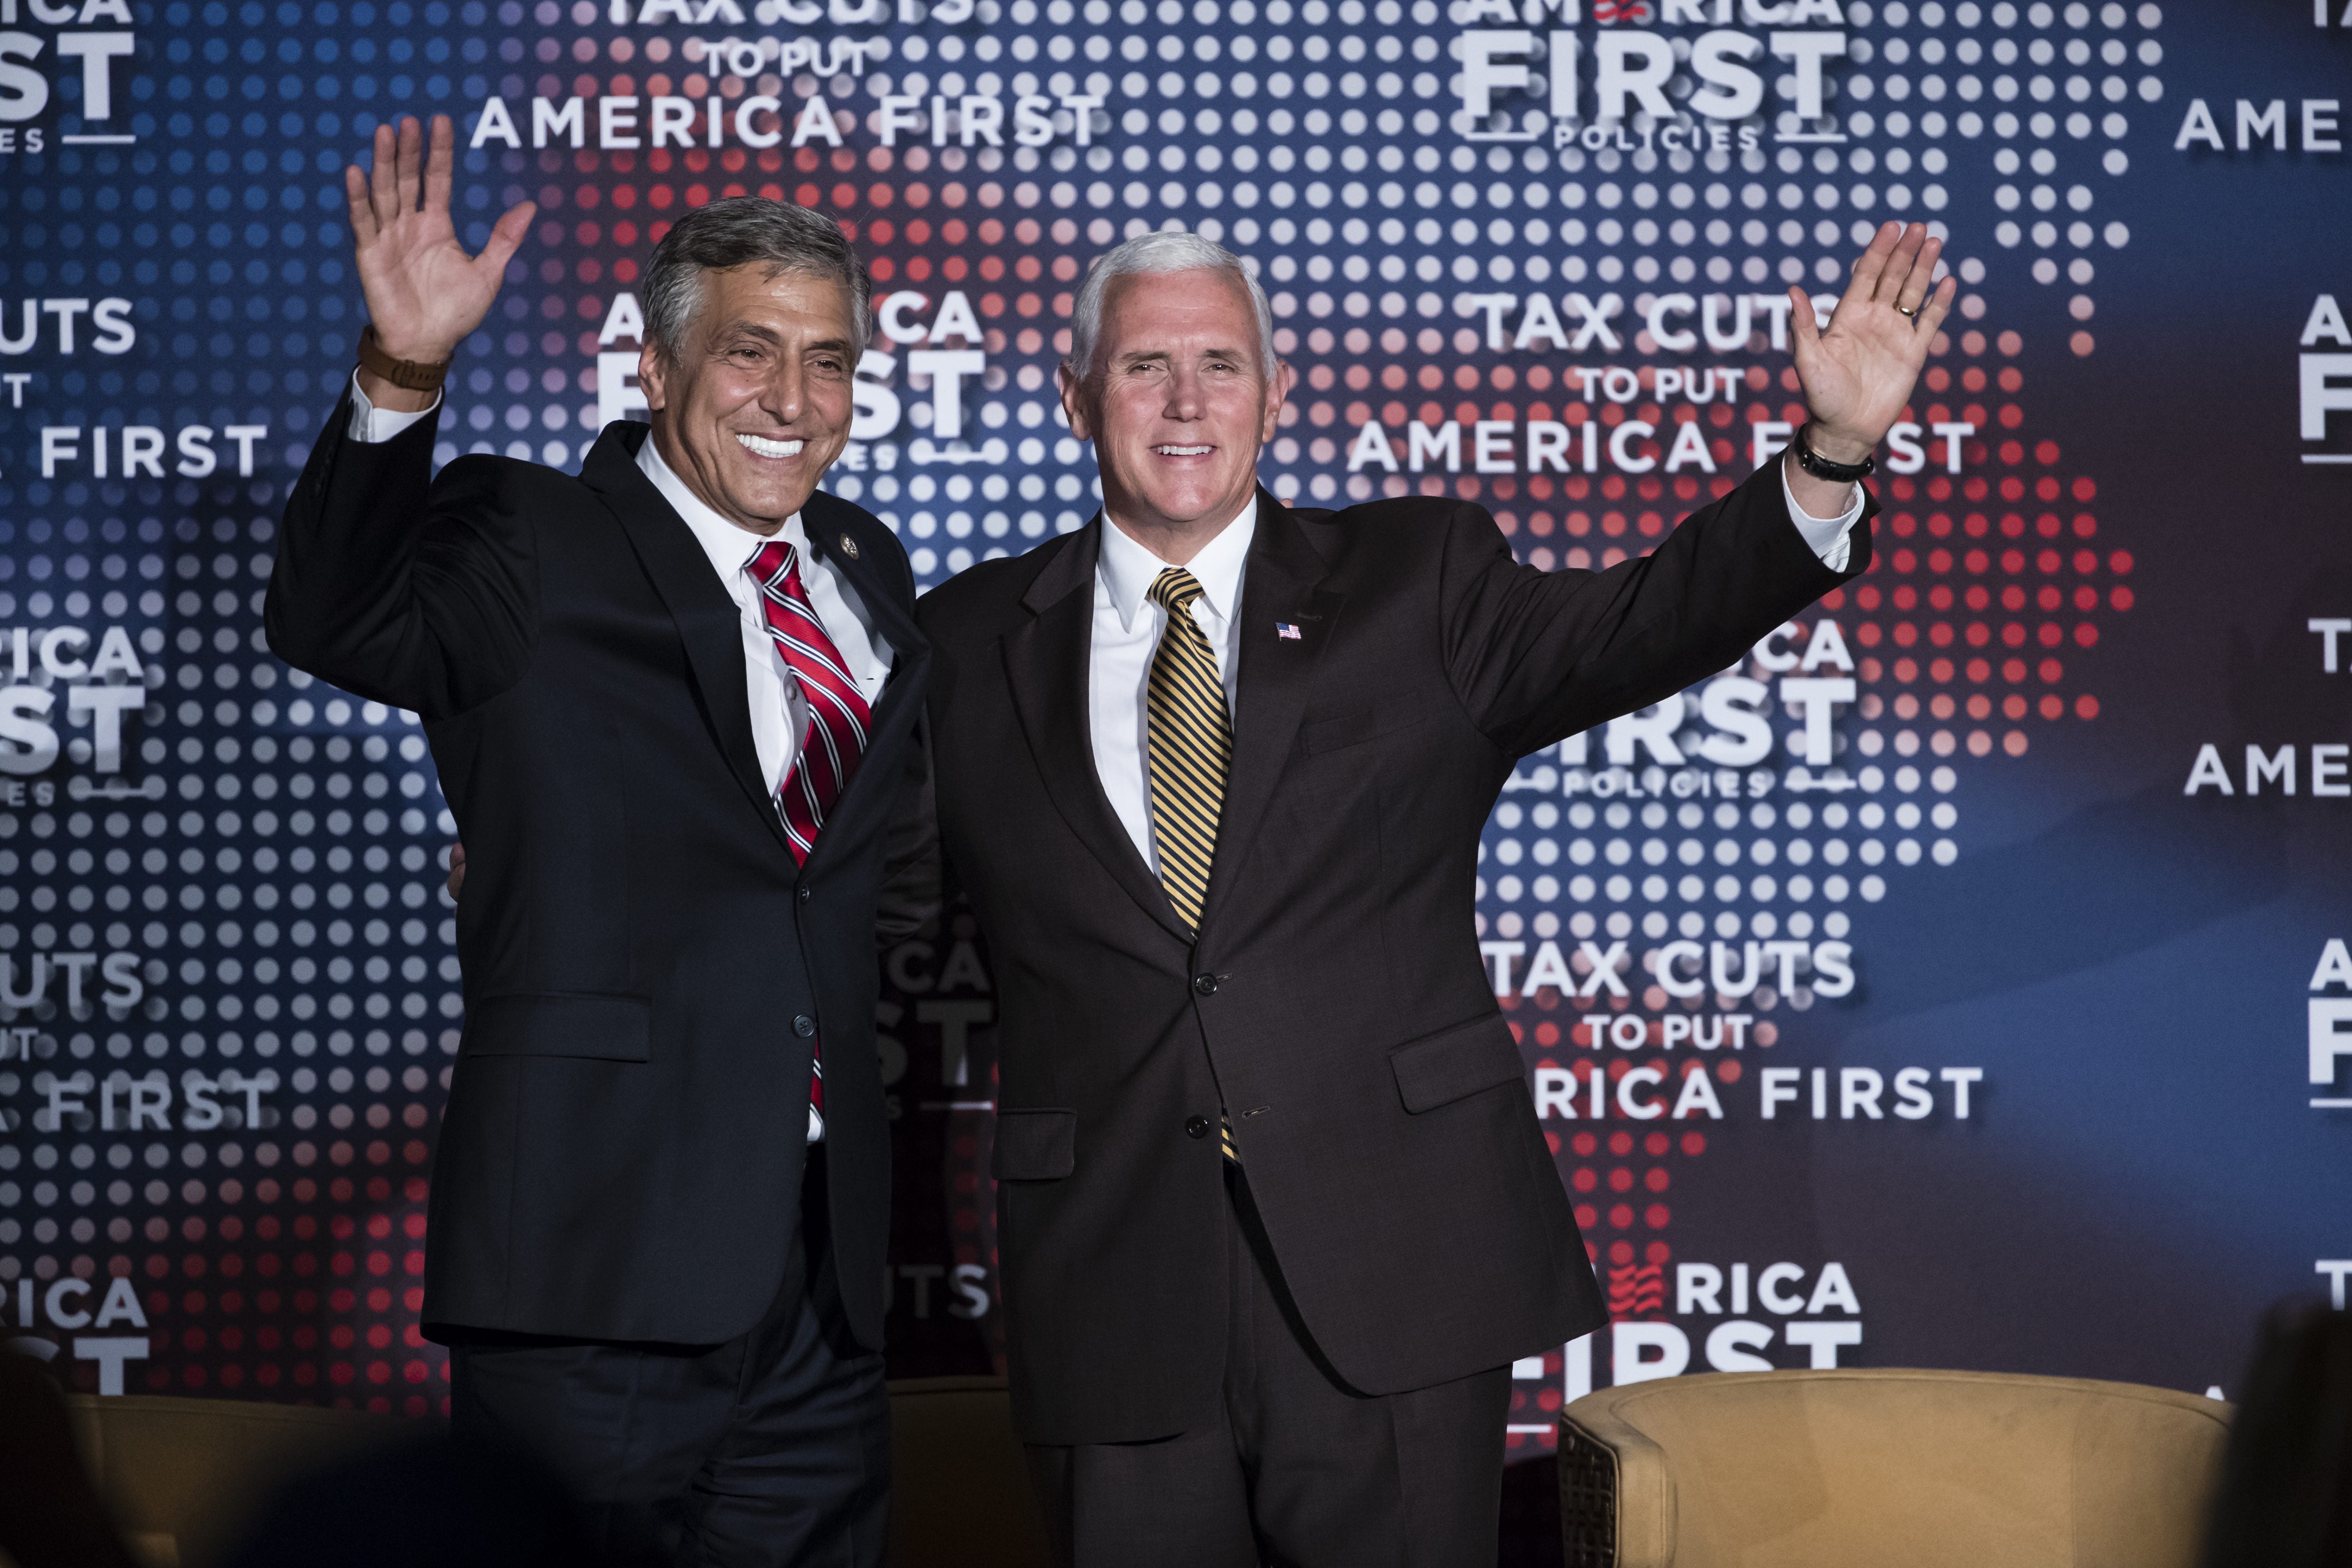 Republican U.S. Senate candidate Rep. Lou Barletta, R-Pa., left, and Vice President Mike Pence wave to audience members at an America First Policies event in Philadelphia, Monday, July 23, 2018.